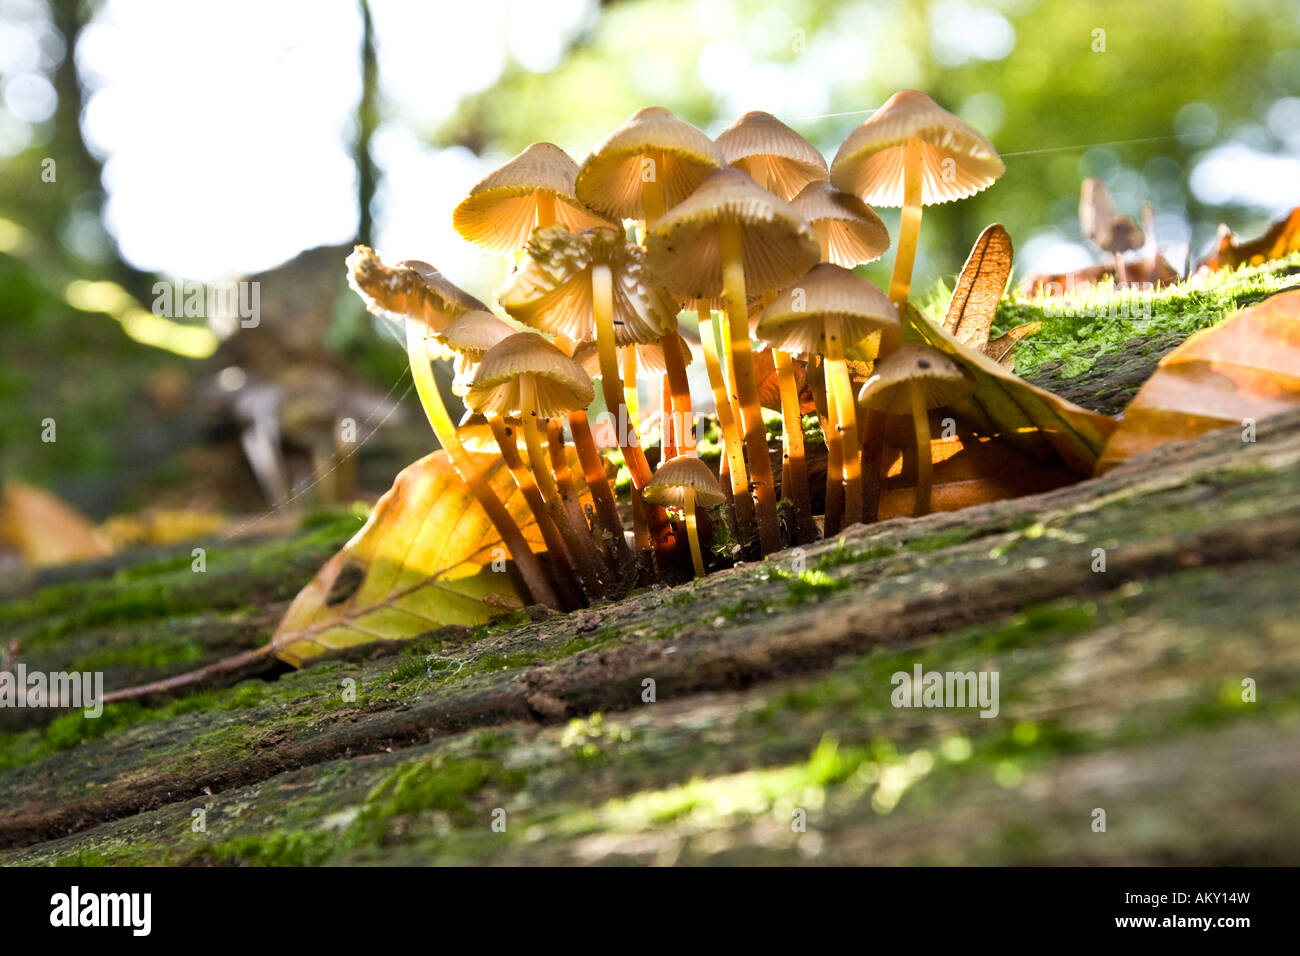 Mushrooms with moss on a mouldy tree trunk Stock Photo